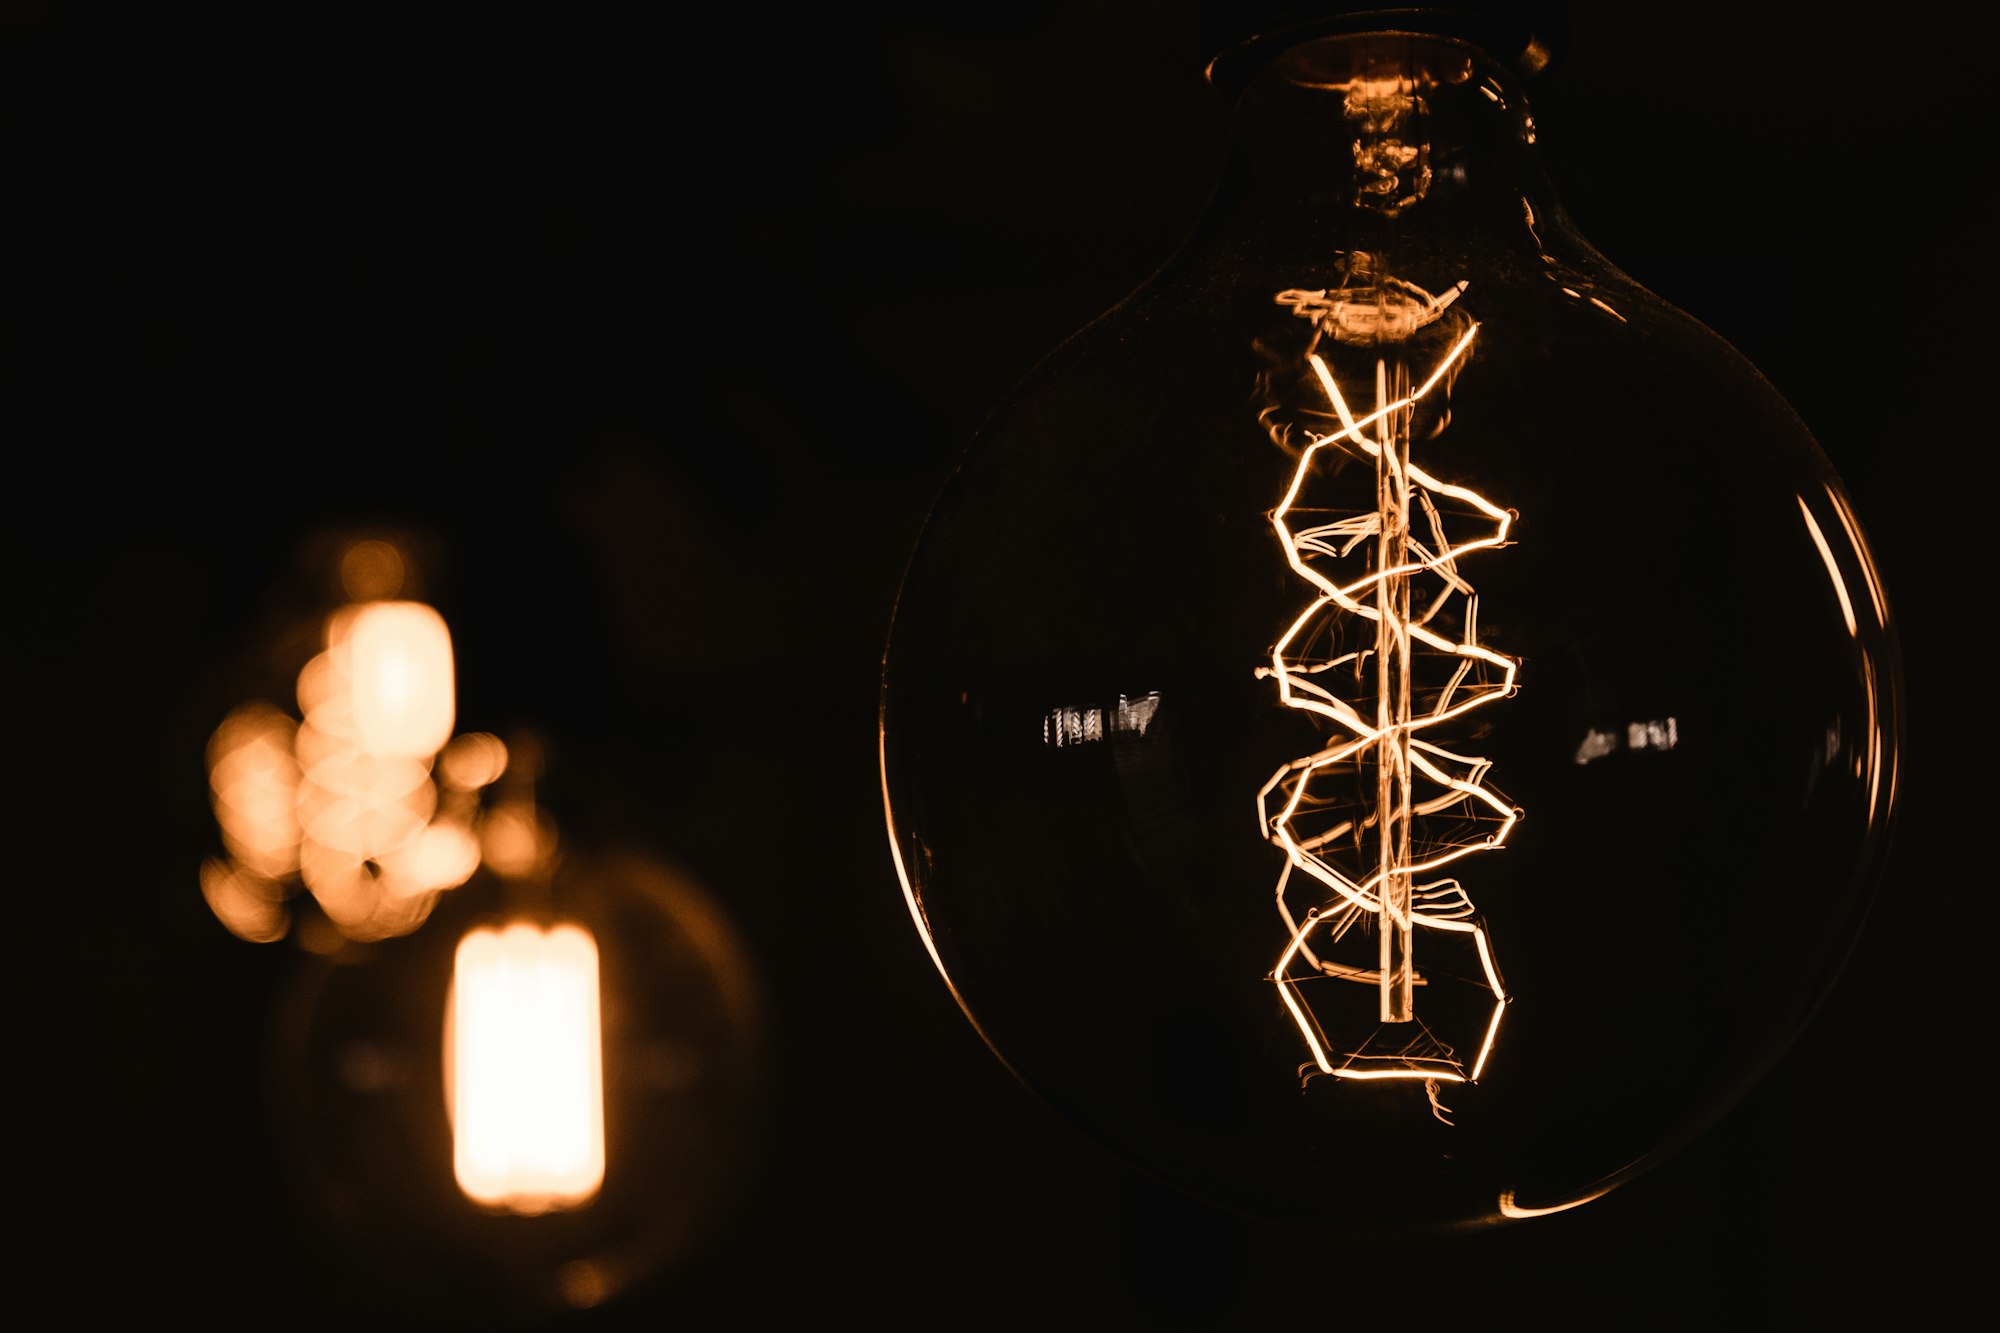 Exposed filament light bulbs making a comeback in 2020